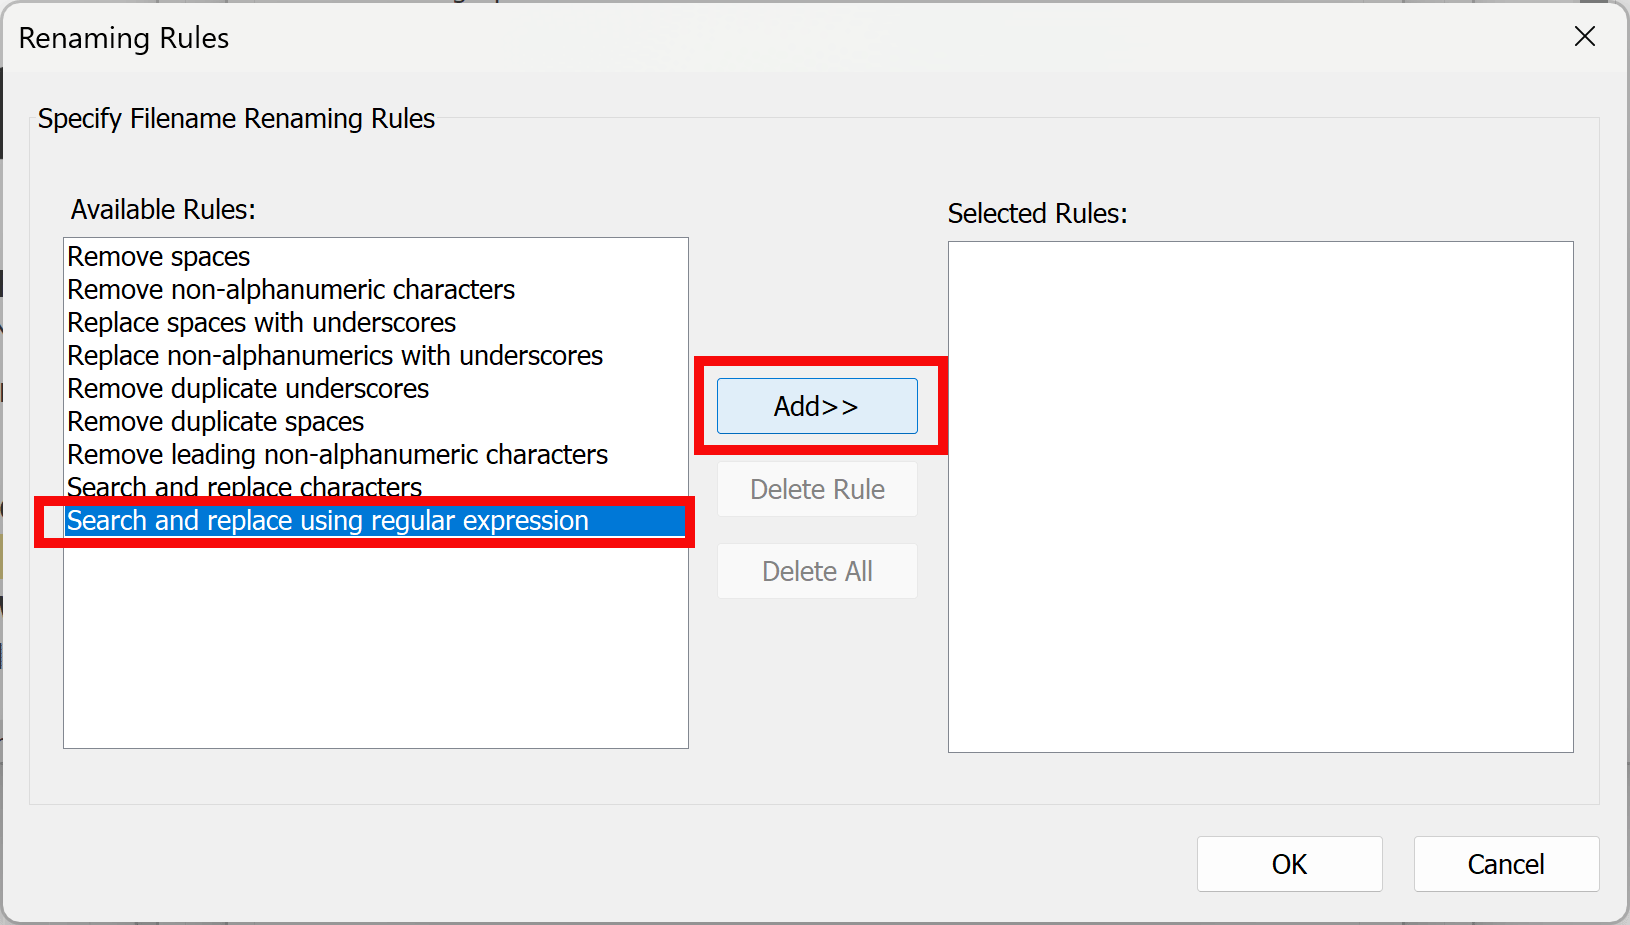 Select Search and replace using regular expressions option and press Add button